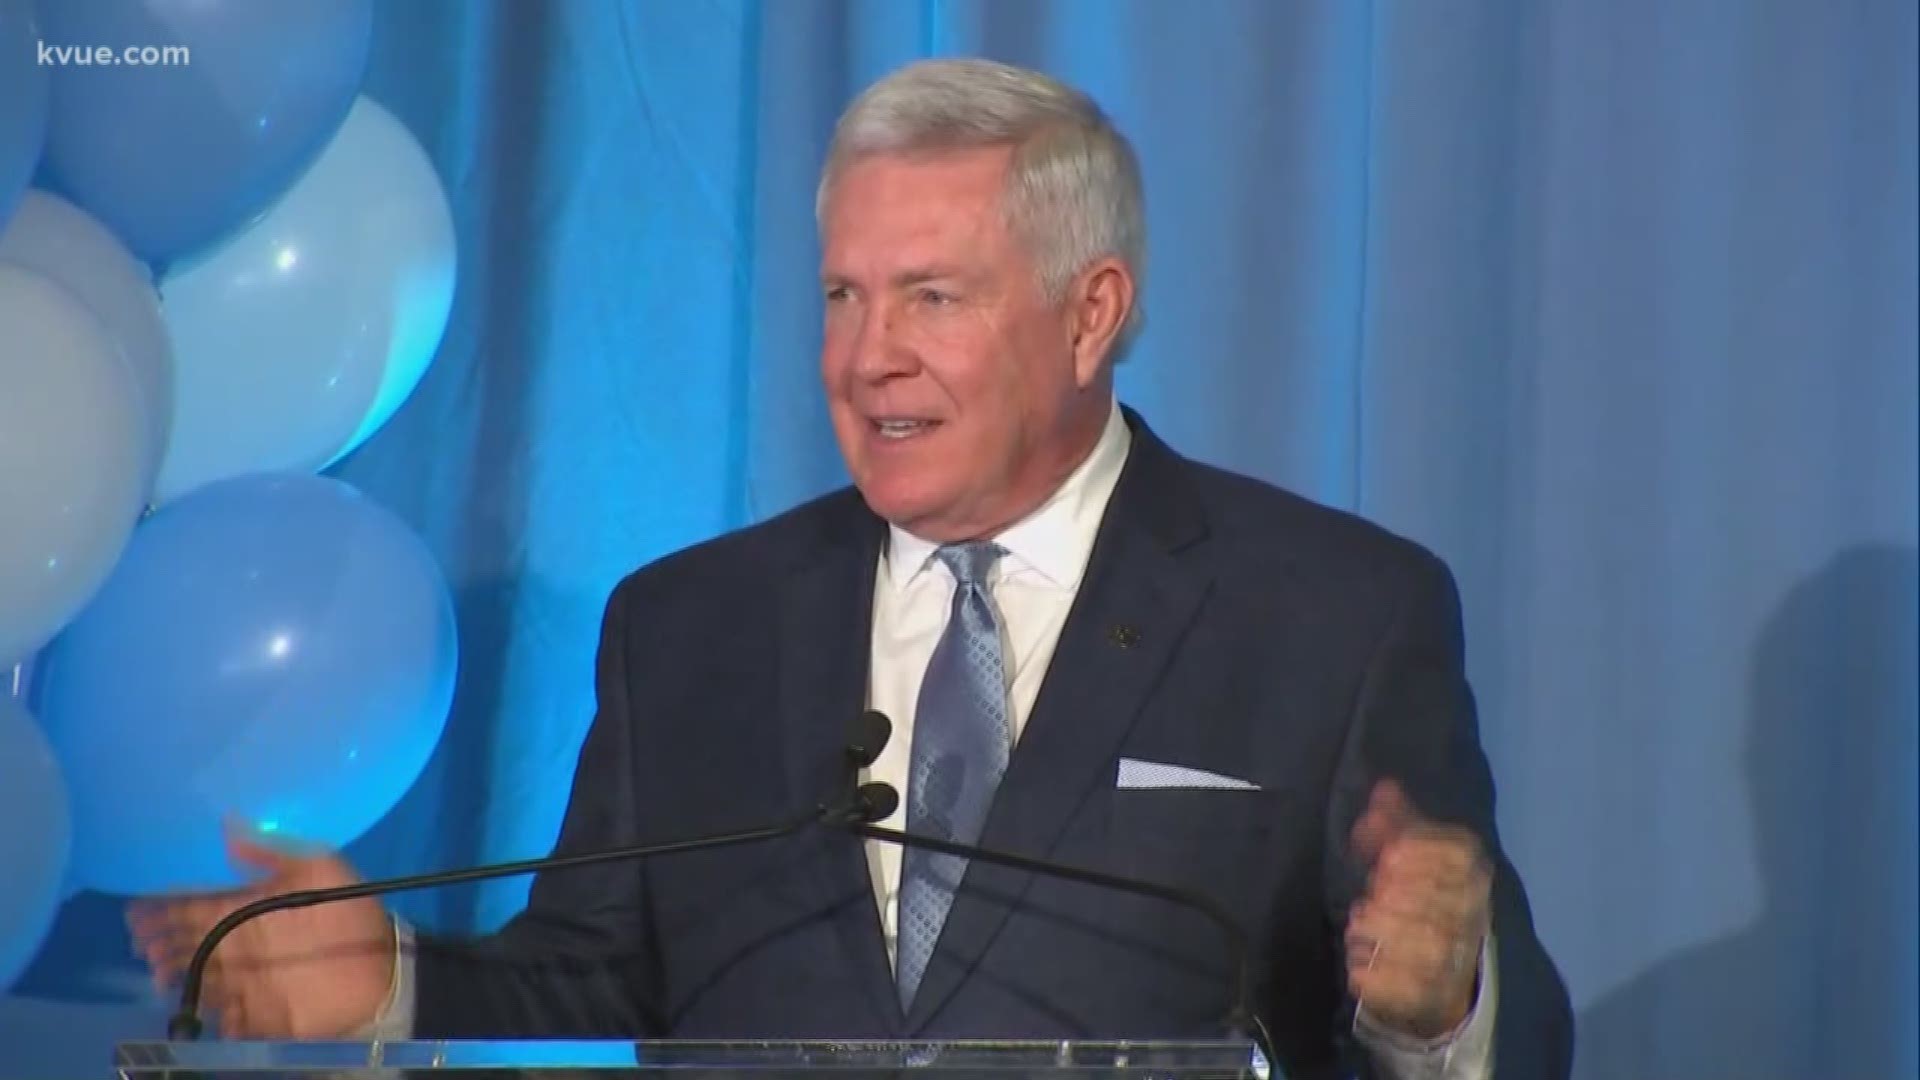 Former Longhorns head football coach Mack Brown was introduced as the North Carolina Tar Heels head football coach during a press conference Tuesday morning.